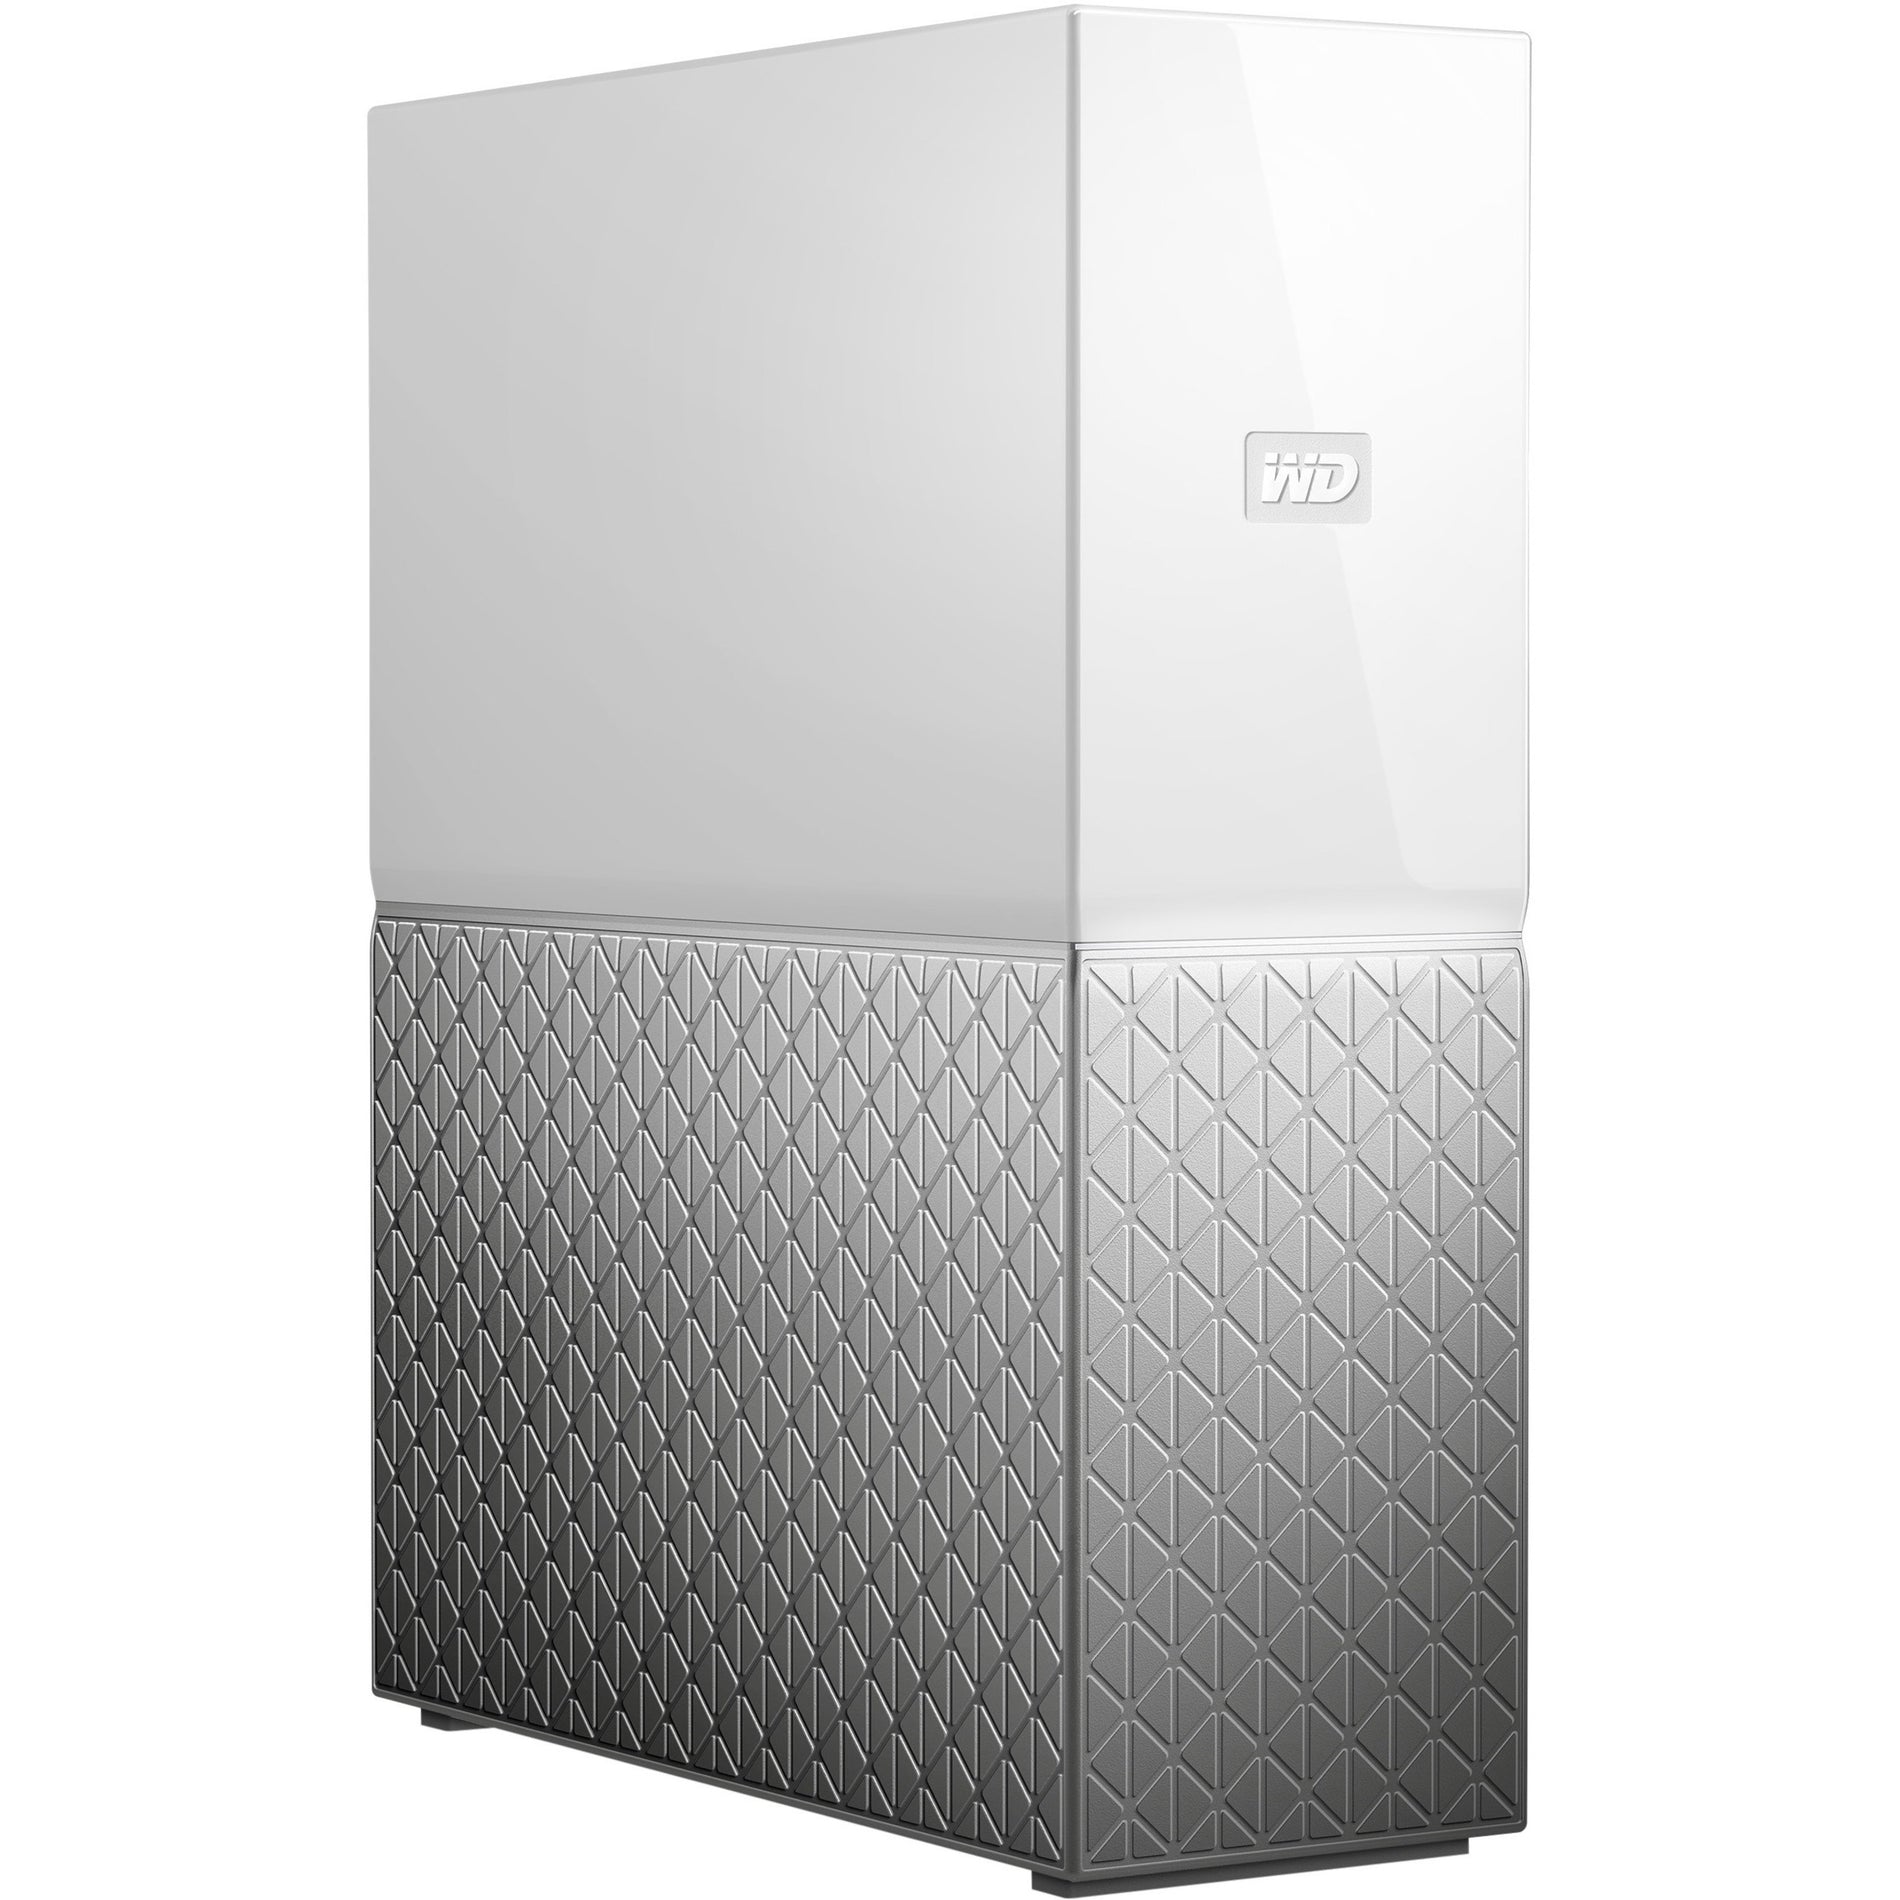 WD My Cloud Home Personal Cloud Storage (WDBVXC0040HWT-NESN) Right image